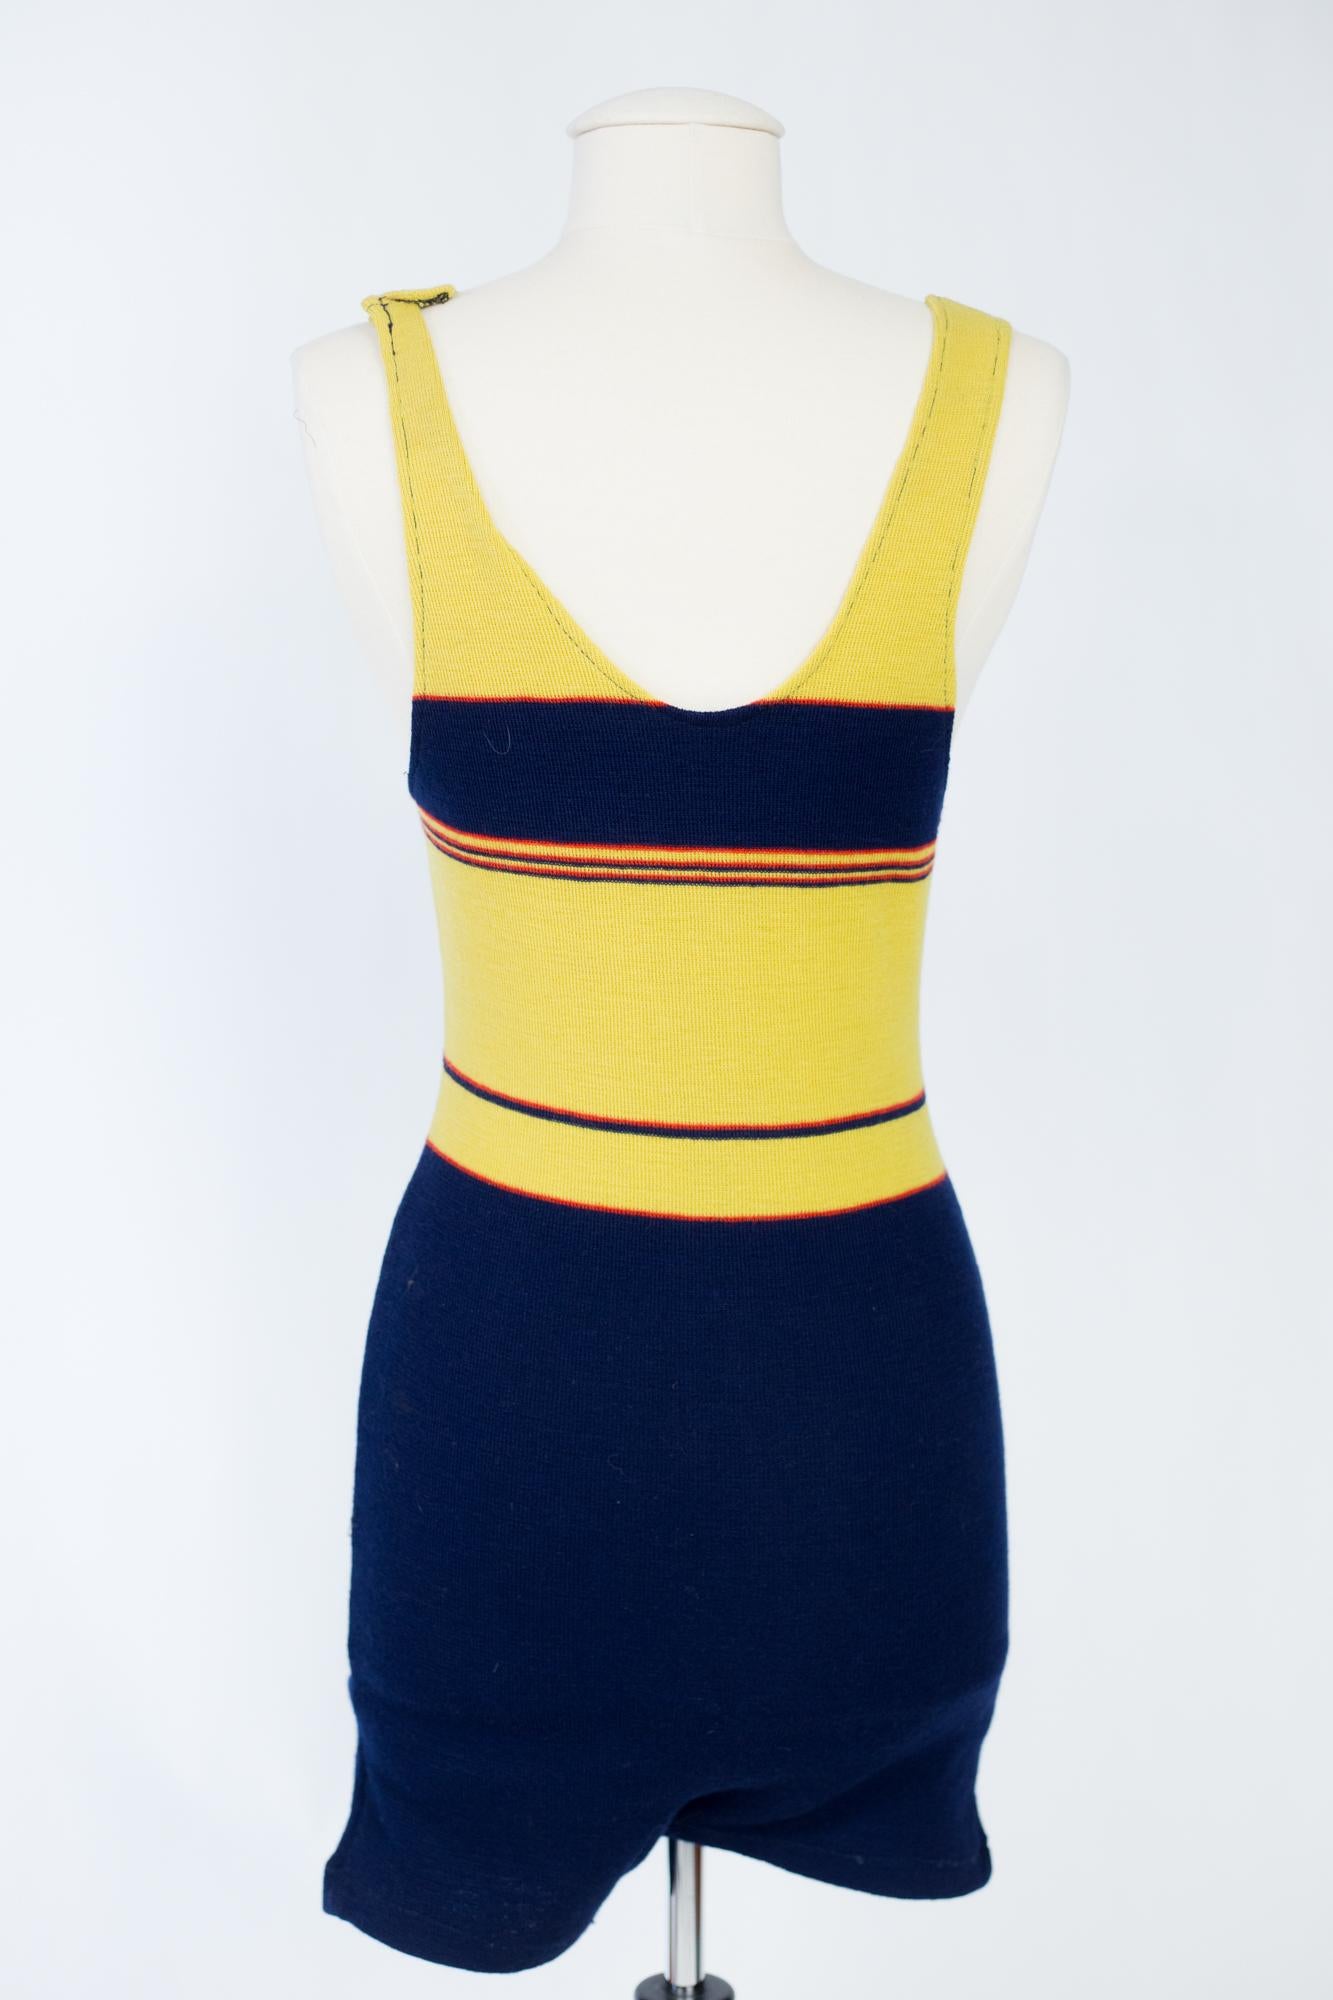 Women's Wool knit Art Deco bathing suit in Chanel or Patou Style- France Circa 1925 For Sale